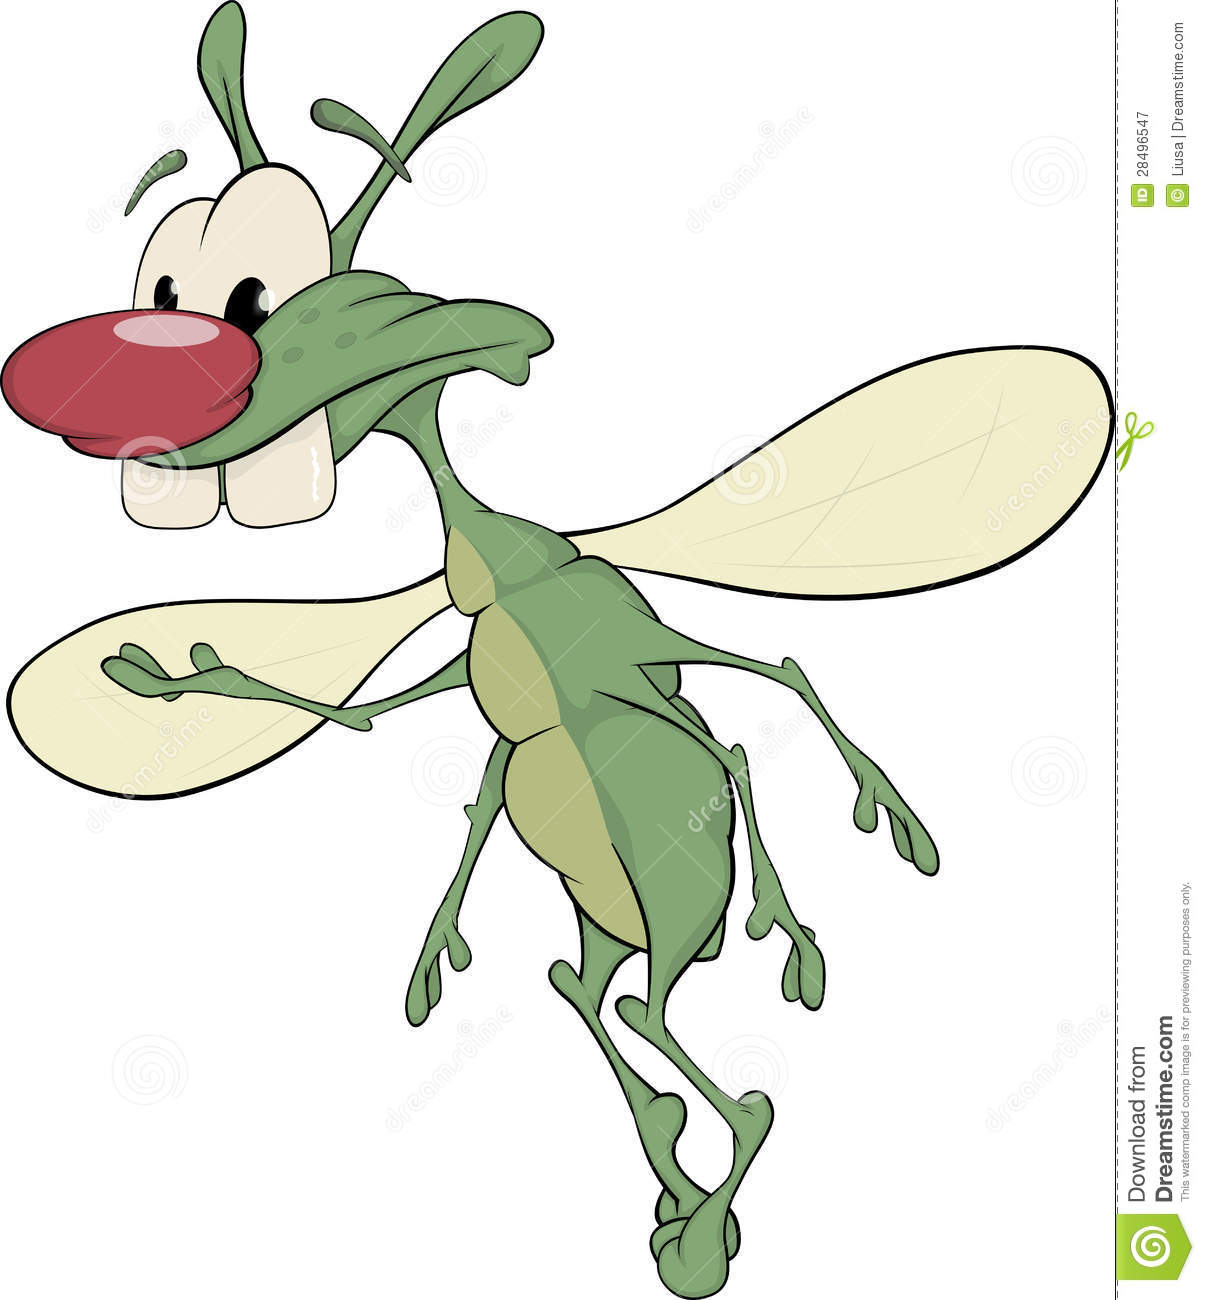 Green Insect Cartoon Royalty Free Stock Photography   Image  28496547